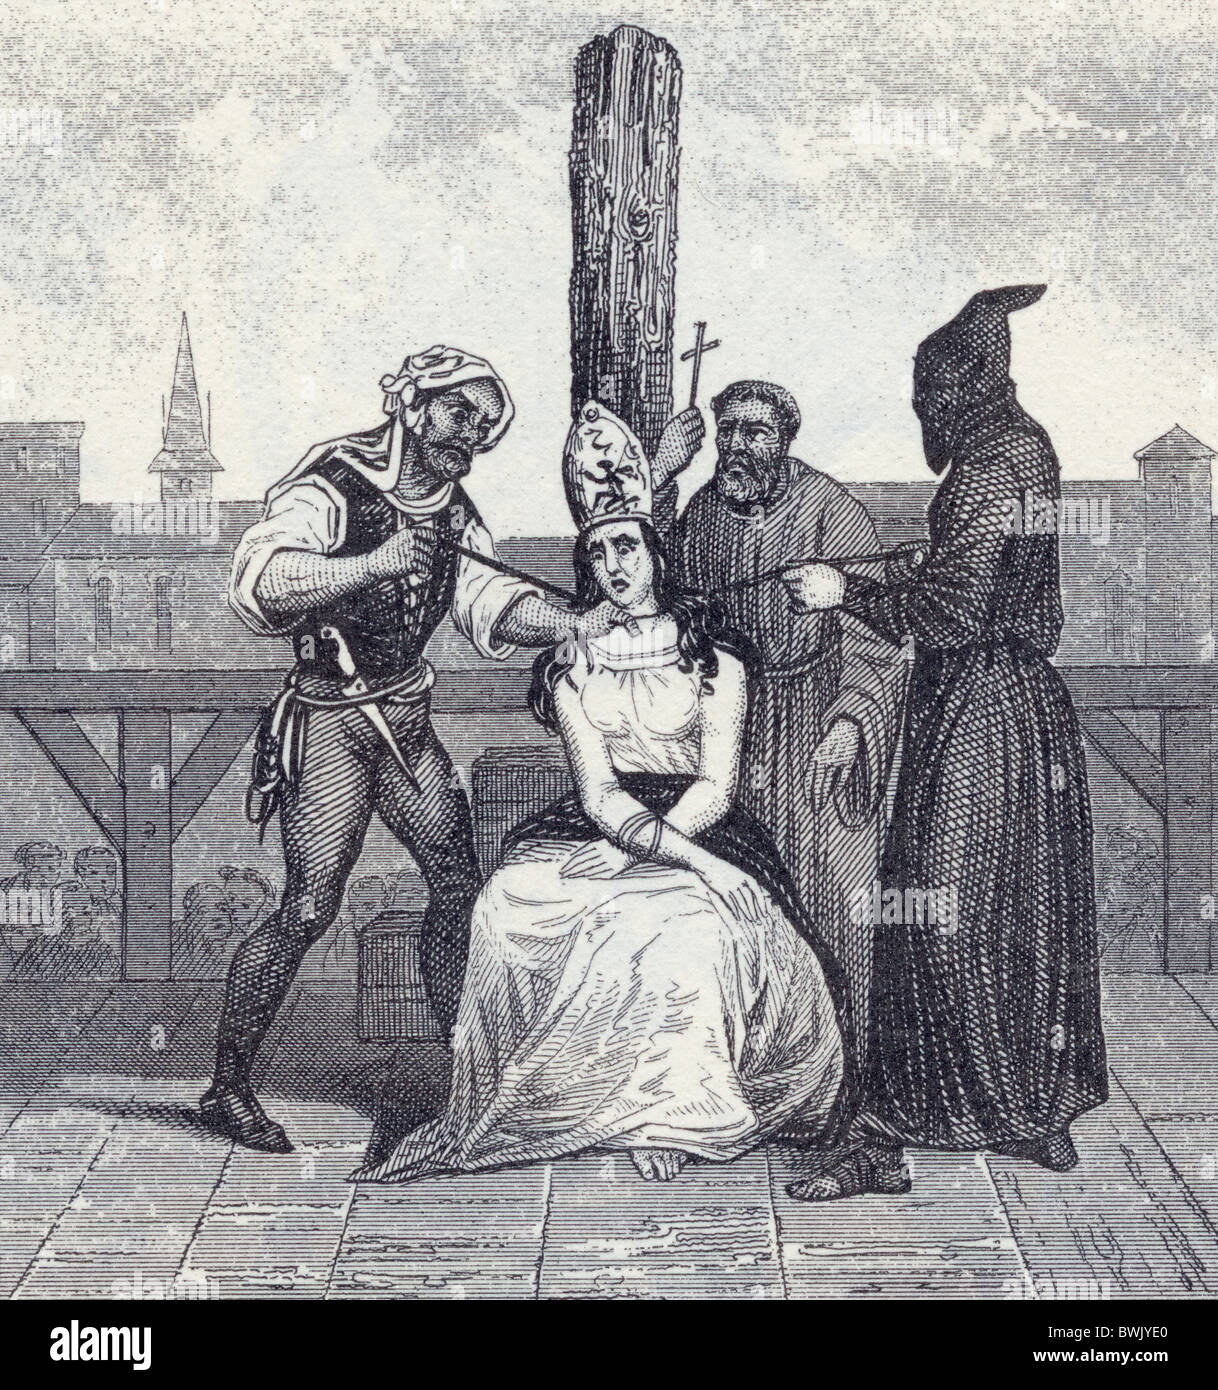 A heretic is garroted during the Spanish Inquisition. Stock Photo